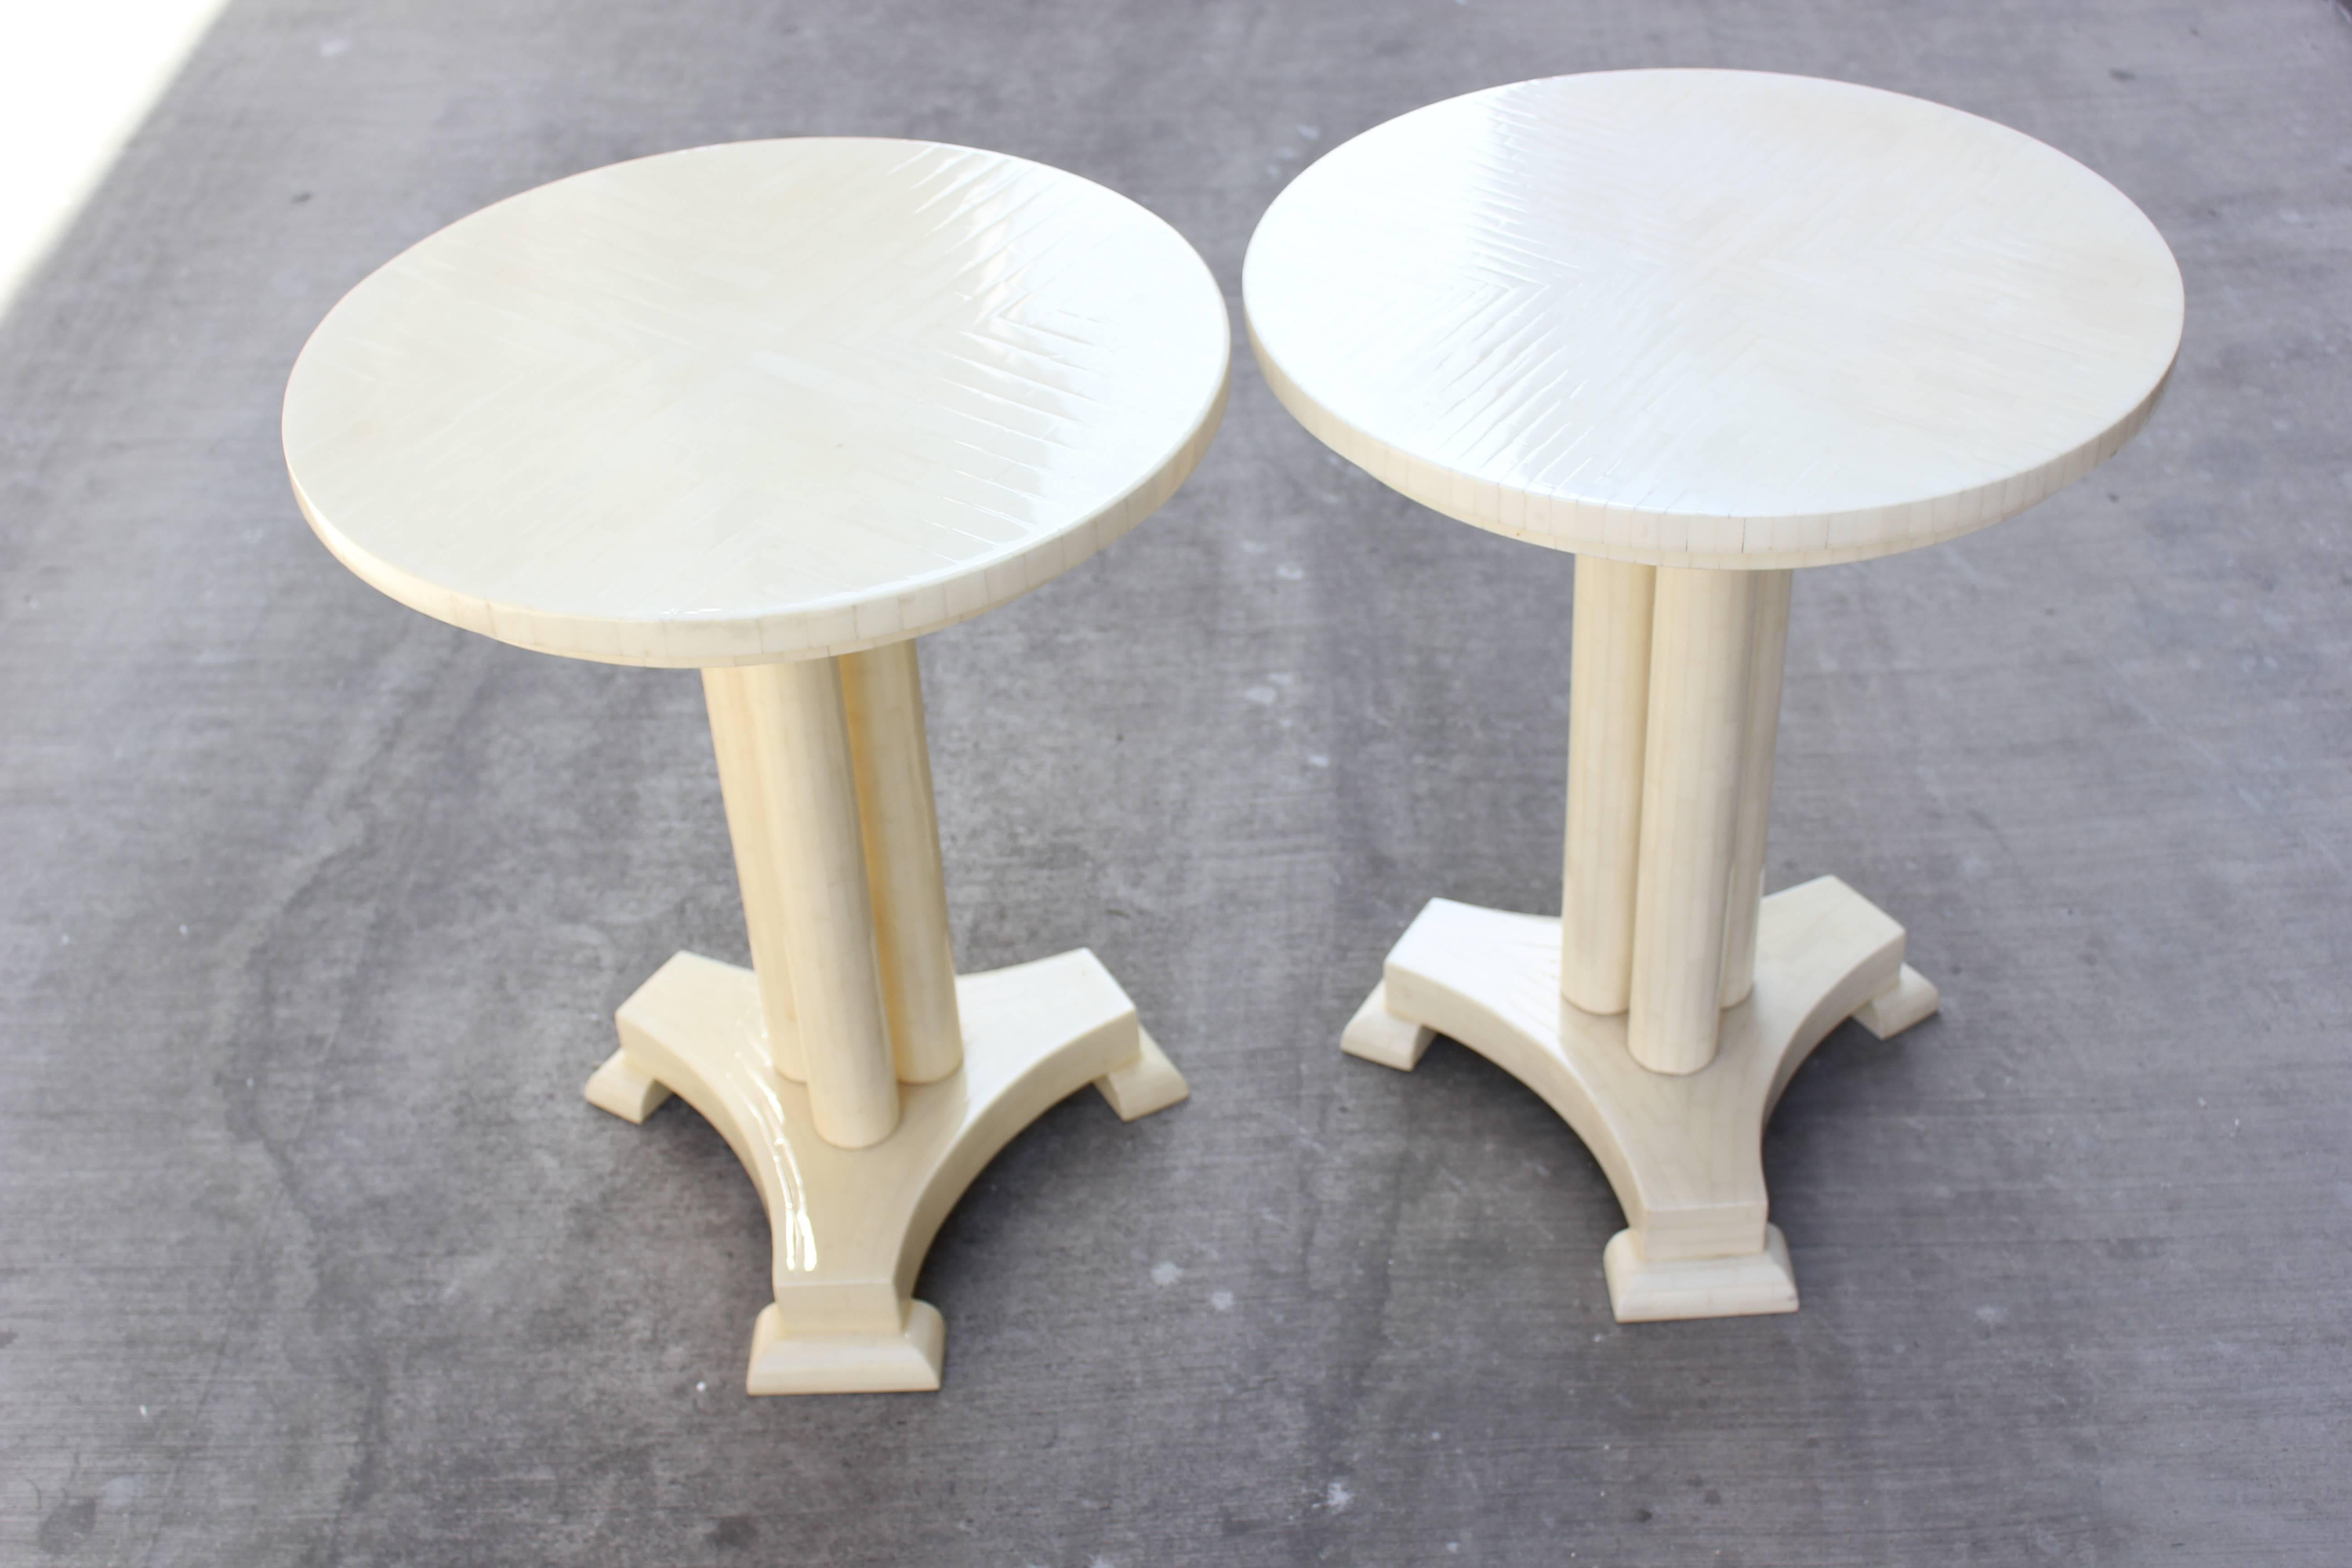 Pair of tesselated bone side tables. Made in Colombia,
1970s. The width of the bone filets are slightly different on the two tables. 
Also one table is slightly darker than the other.